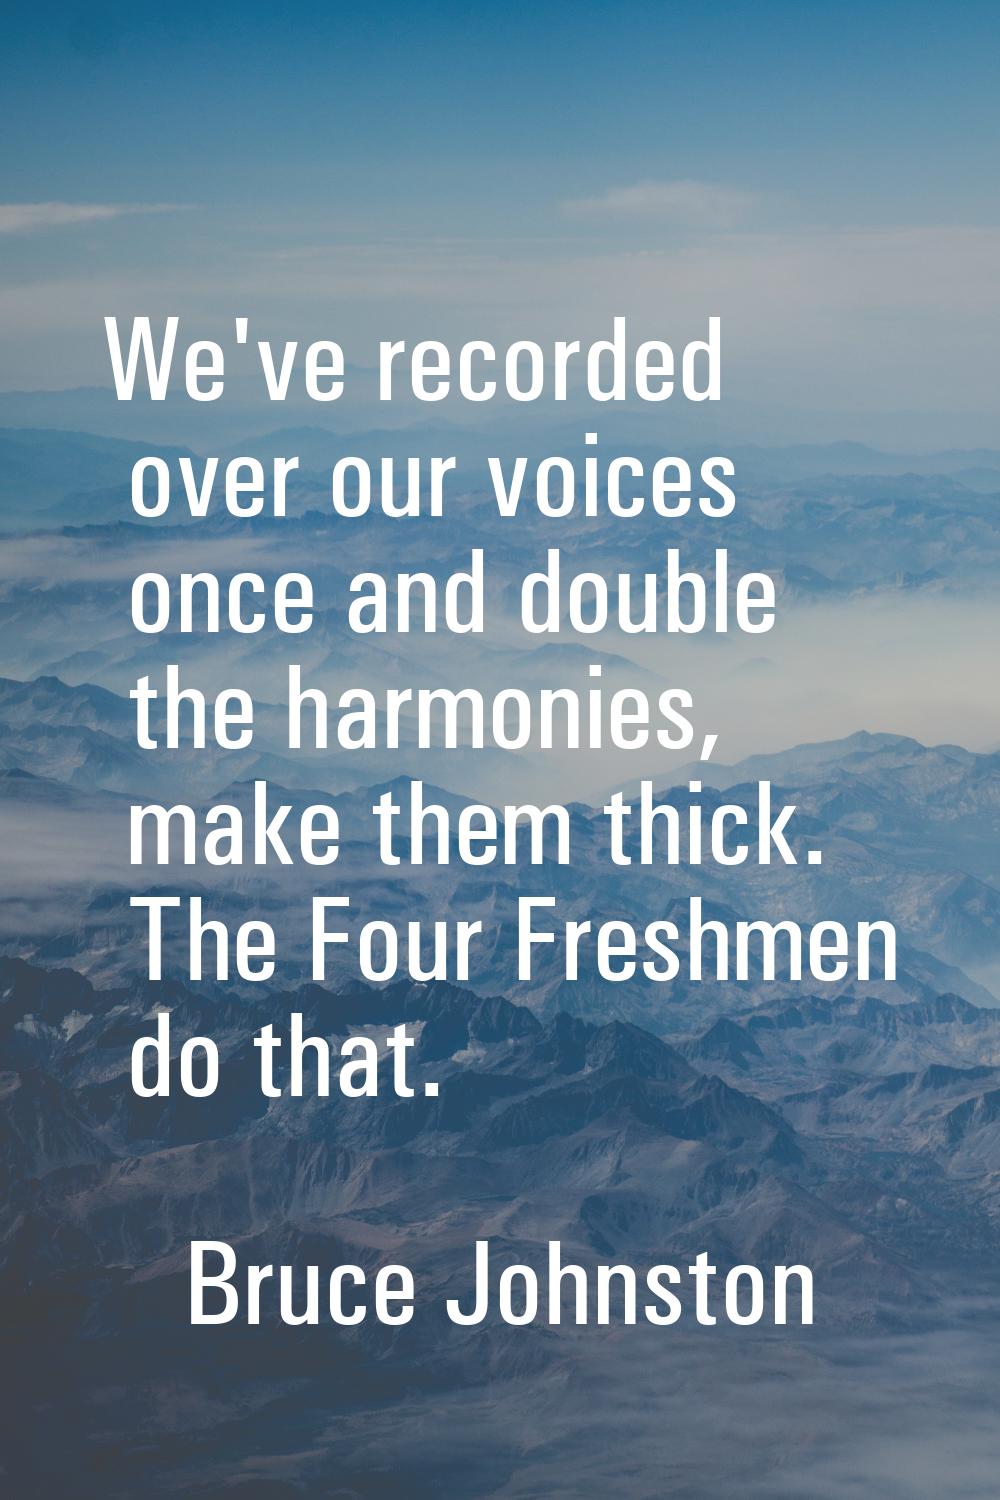 We've recorded over our voices once and double the harmonies, make them thick. The Four Freshmen do